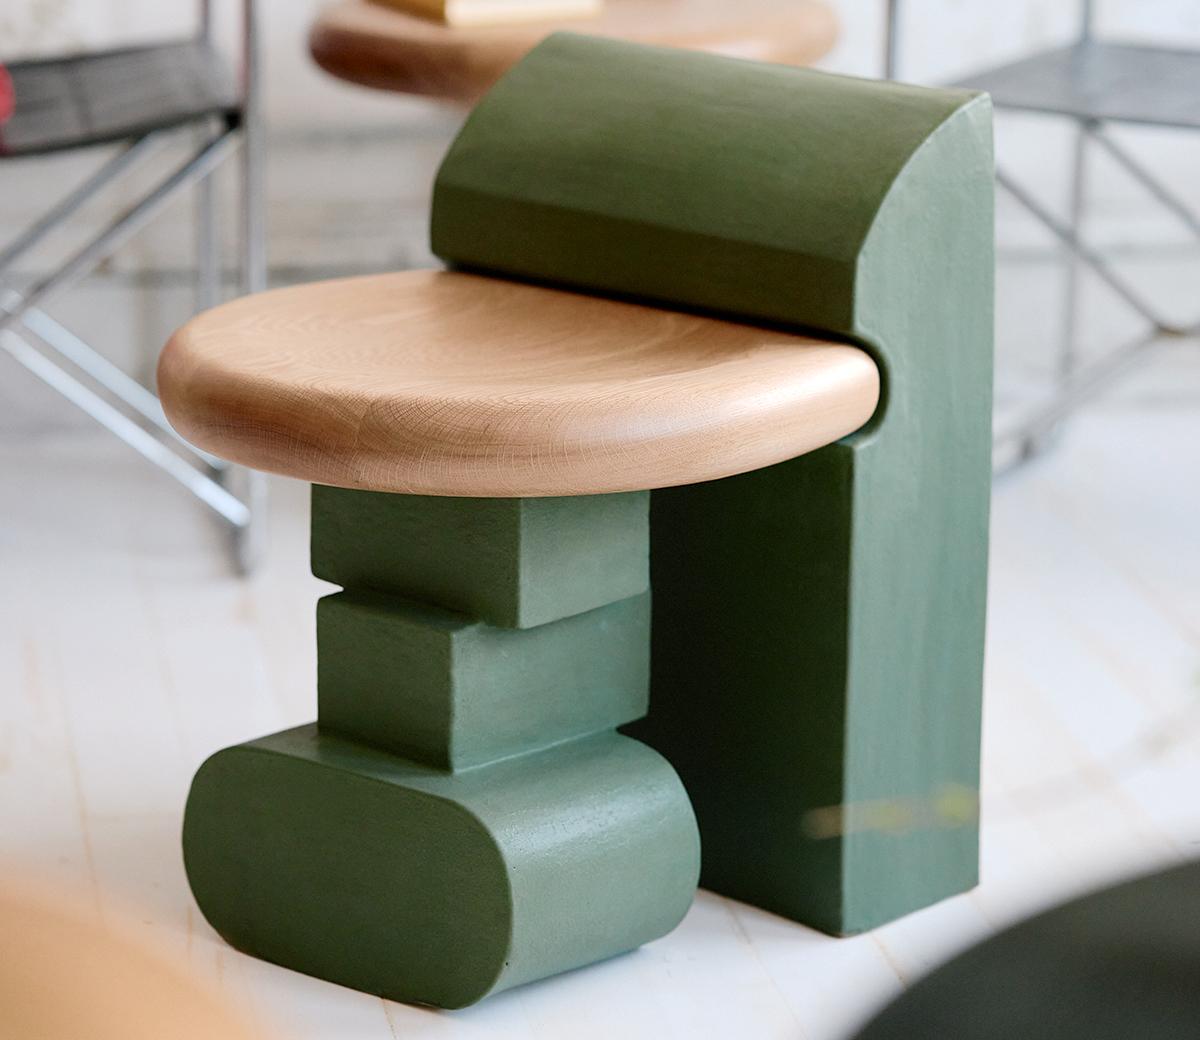 This sculptural stool is composed of three individual elements that nestle into each other. The hand-built clay backrest and leg support the solid oak seat, making it the perfect, modular seating option for small space living. The oak has a subtle